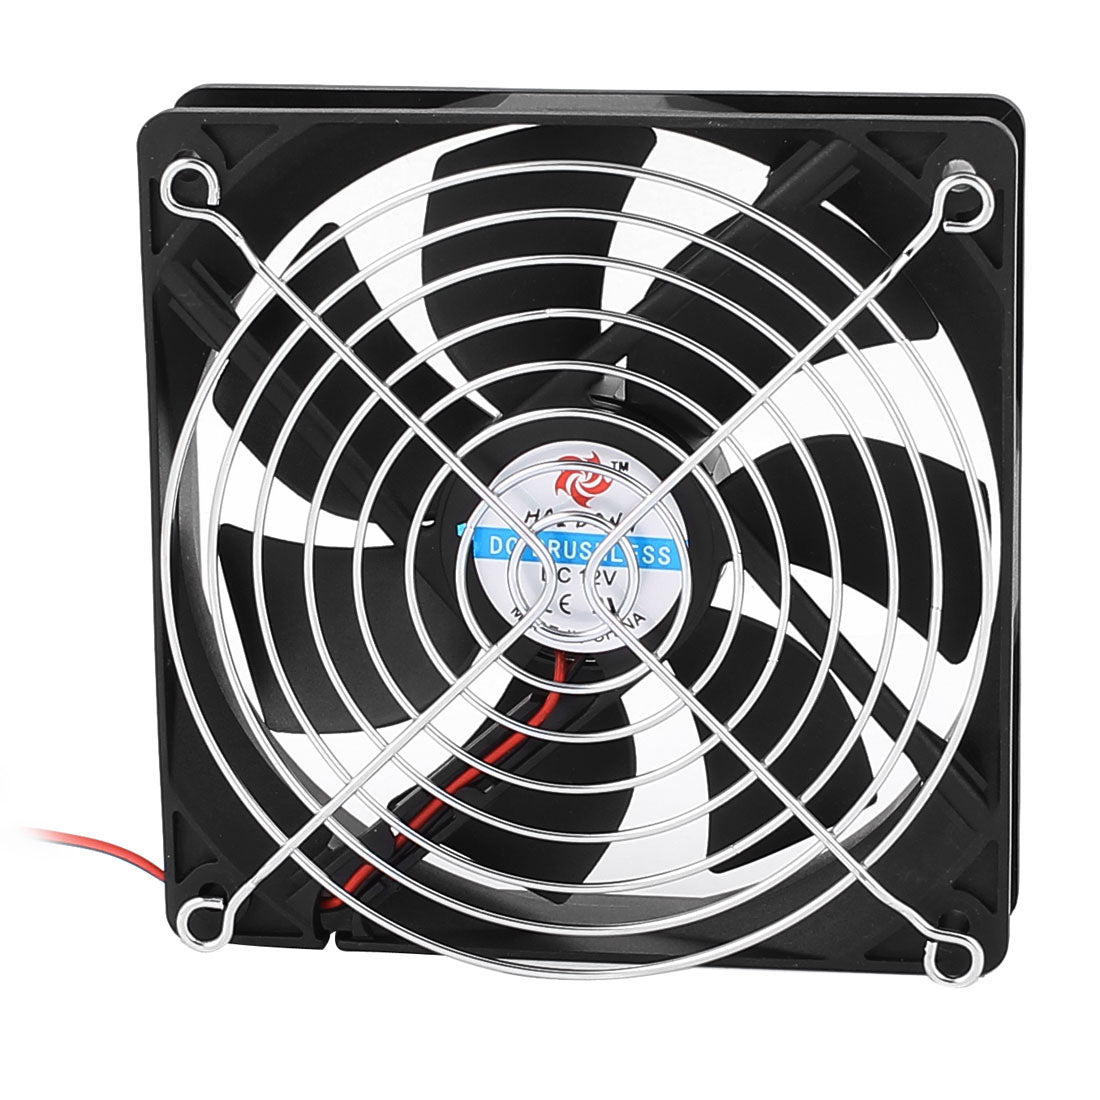 Uxcell Uxcell DC 12V 120x120x25mm Plastic 7 Vanes PC Case Cooling Fan w Dustproof Mesh Filter